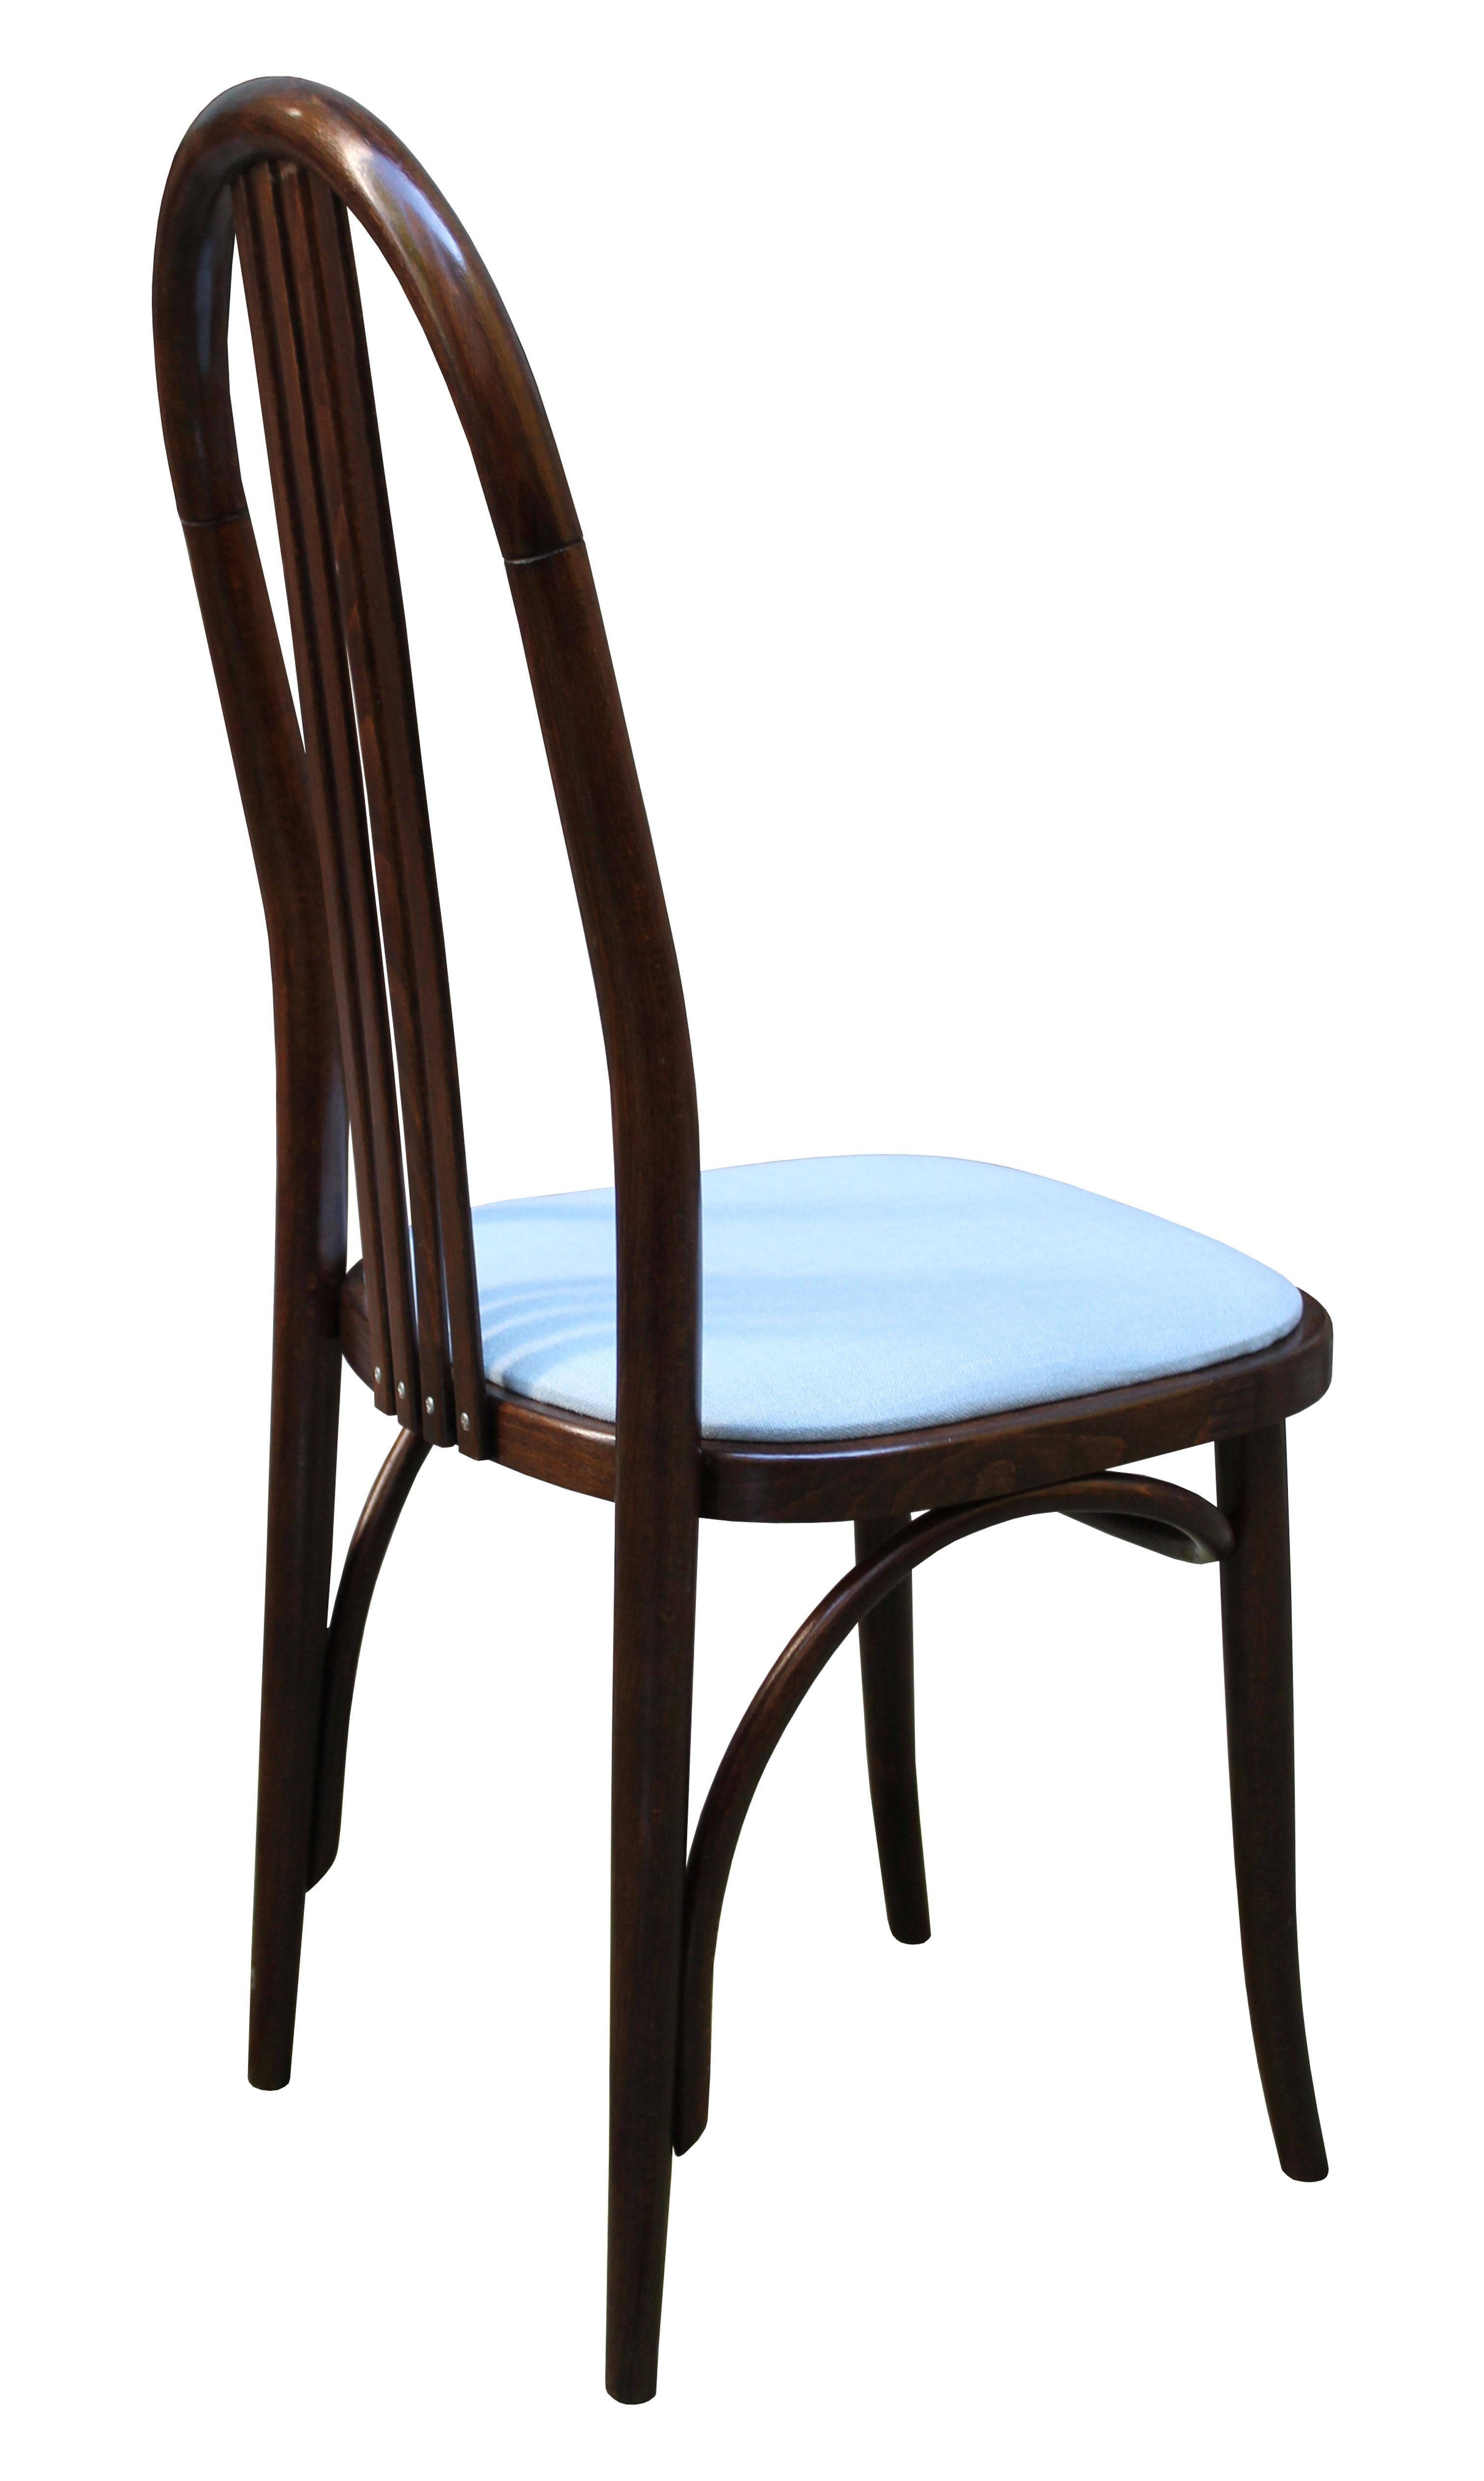 This is an original Postmodernist dining chair model No. 45, designed by Josef Macek and produced by TON Furniture Company in the late 1980’s Czechoslovakia.

As a result of Europe splitting into the West and East after the war, TON was founded as a